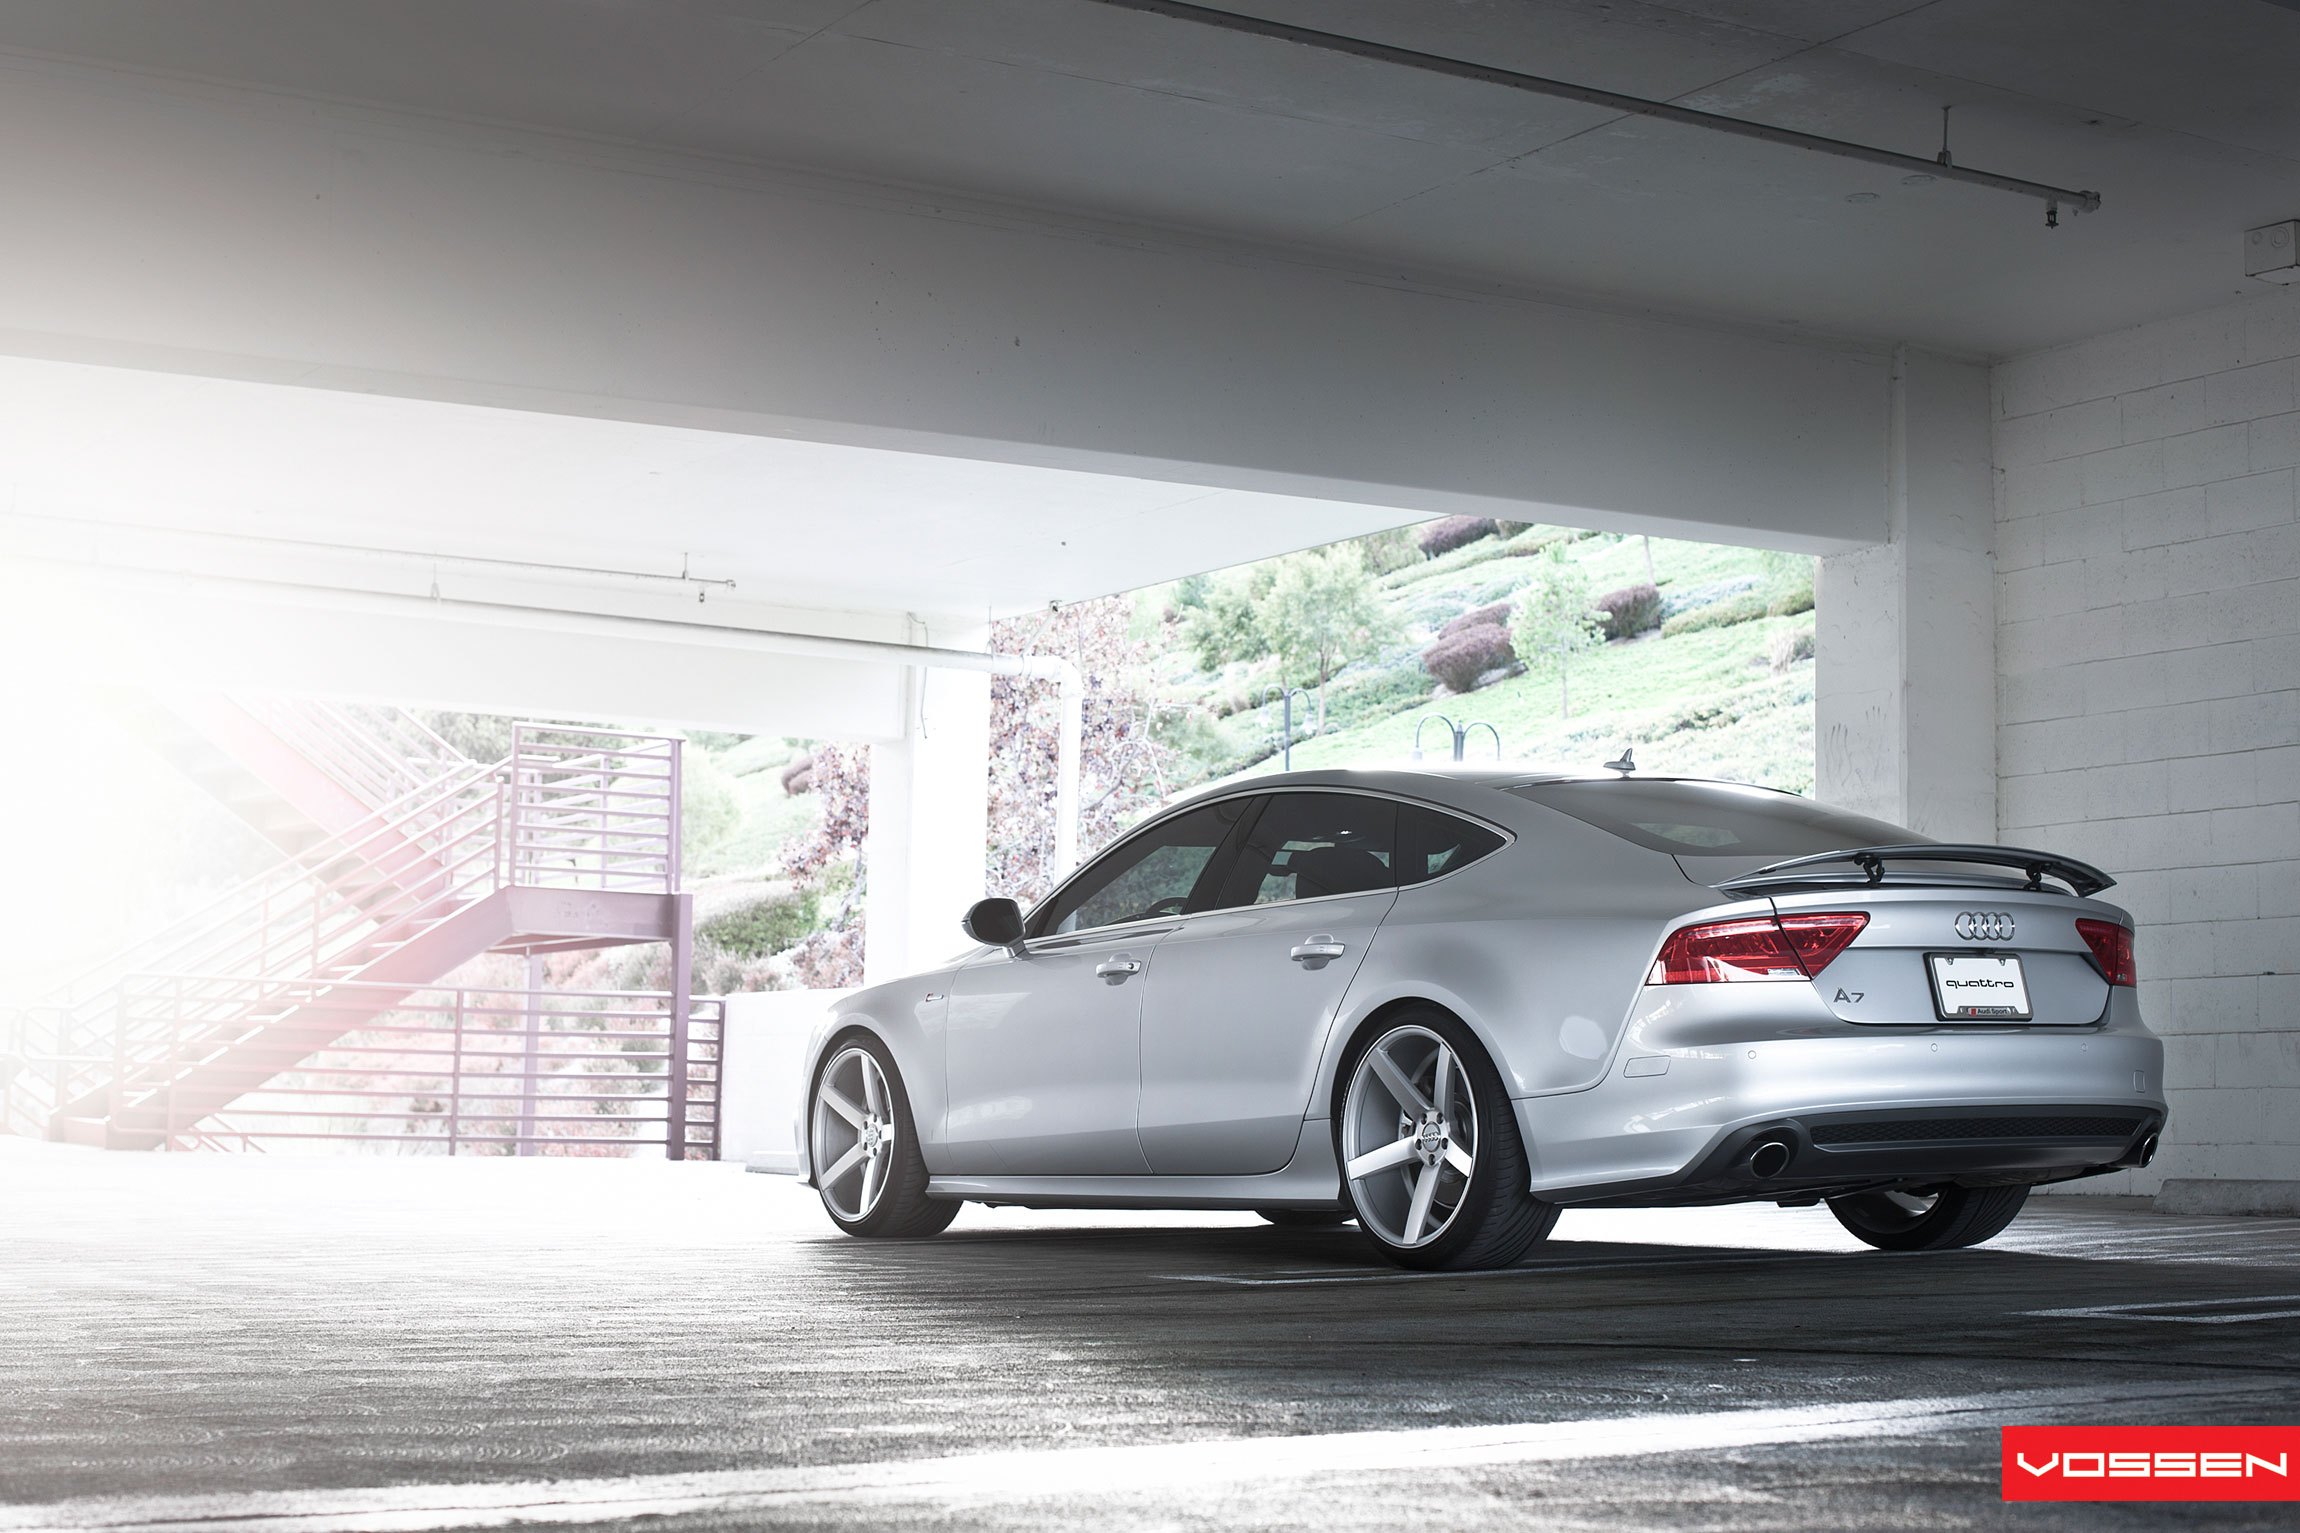 Silver Audi A7 with Aftermarket Red LED Taillights - Photo by Vossen